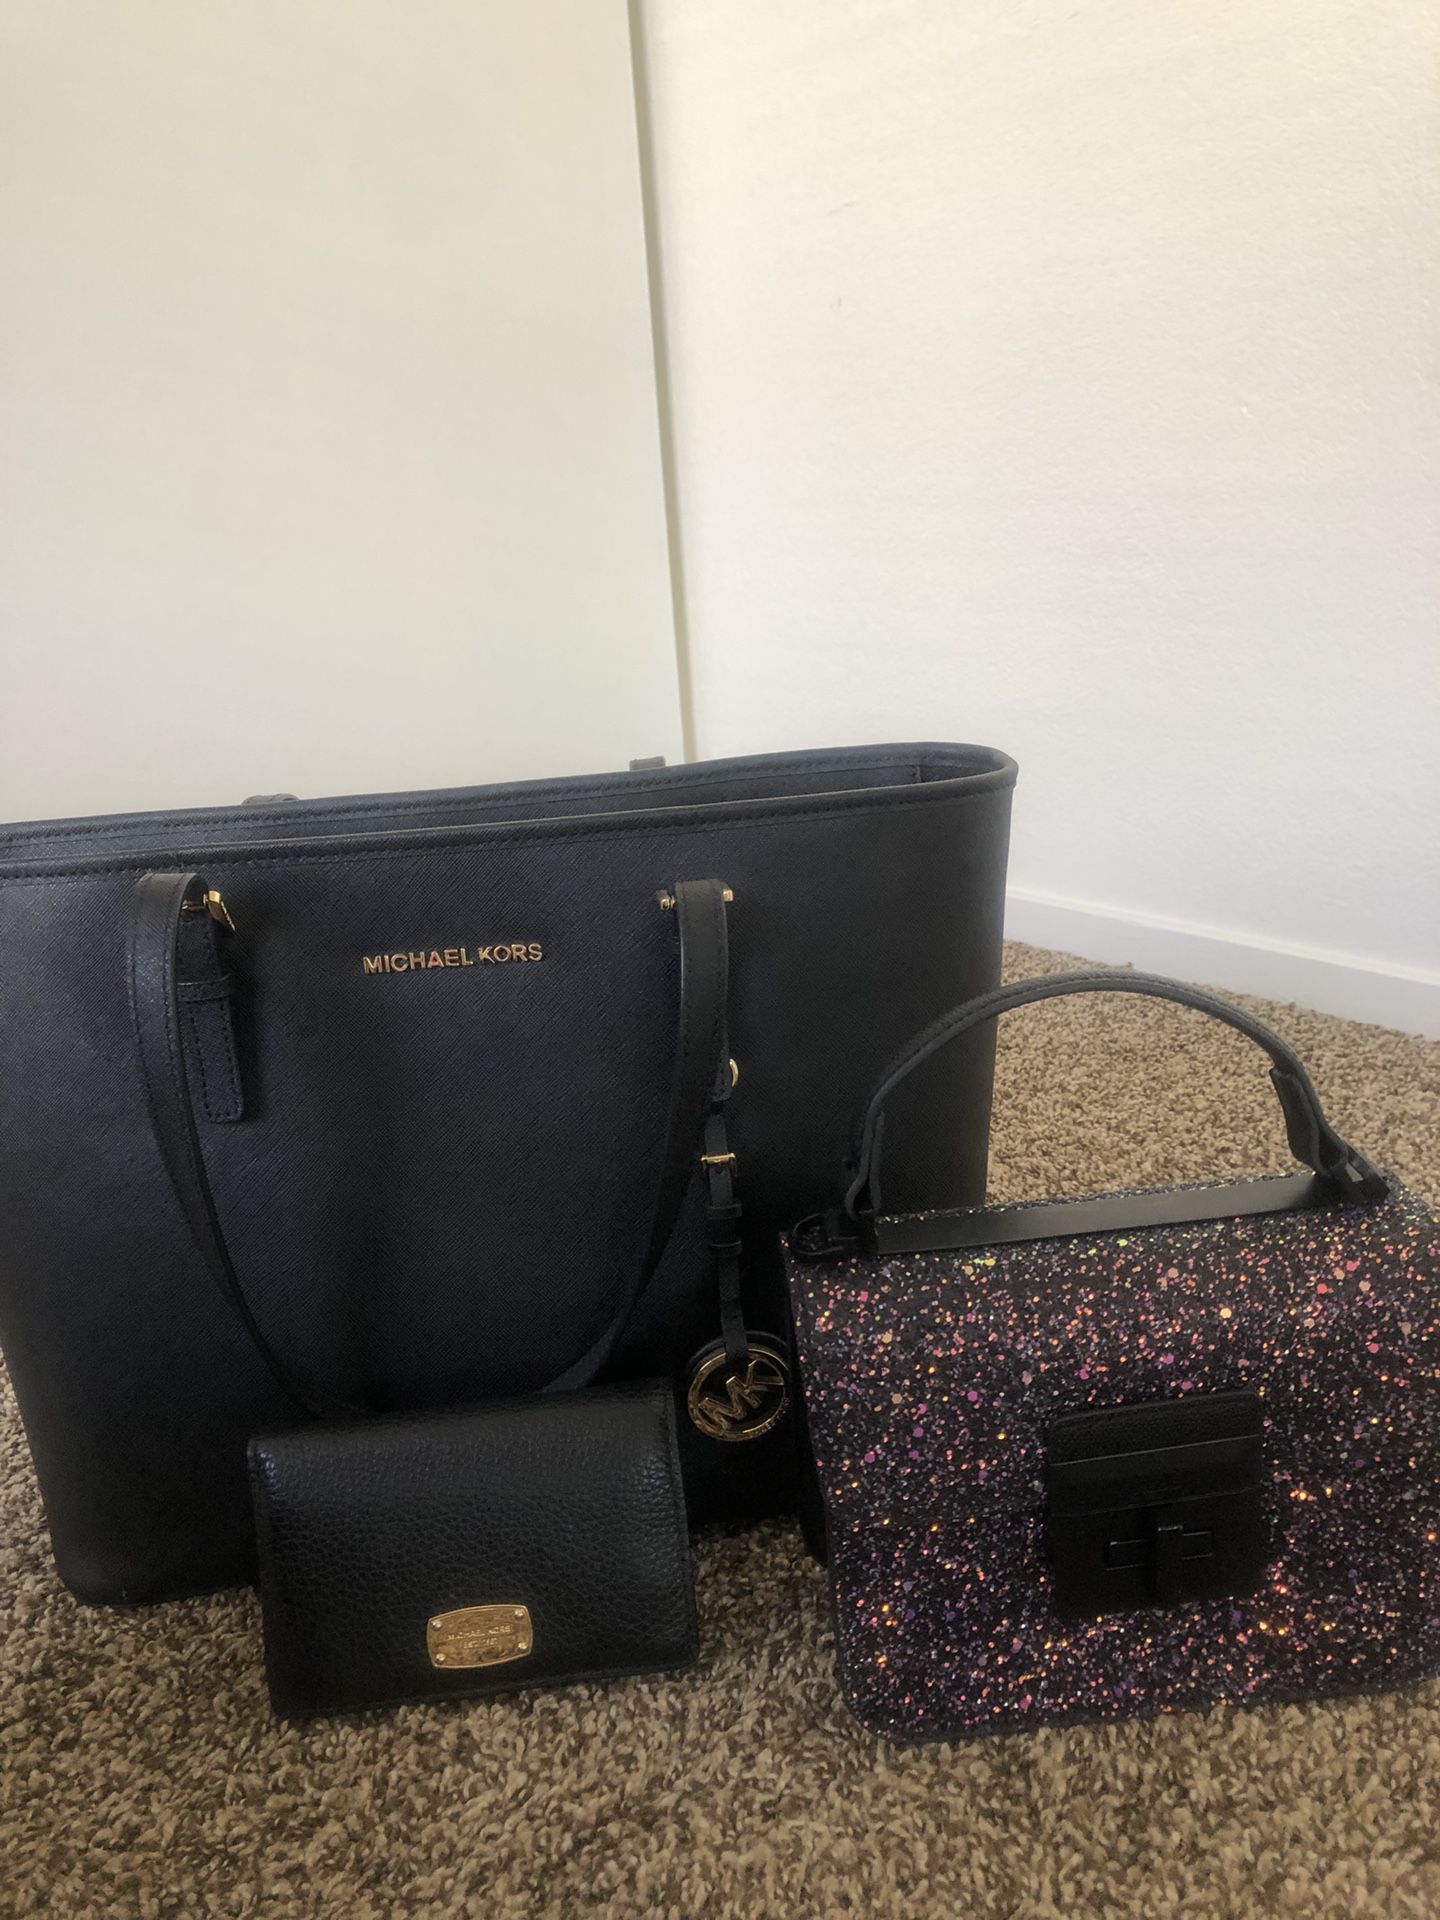 Michael Kors and Aldo bags with matching wallet